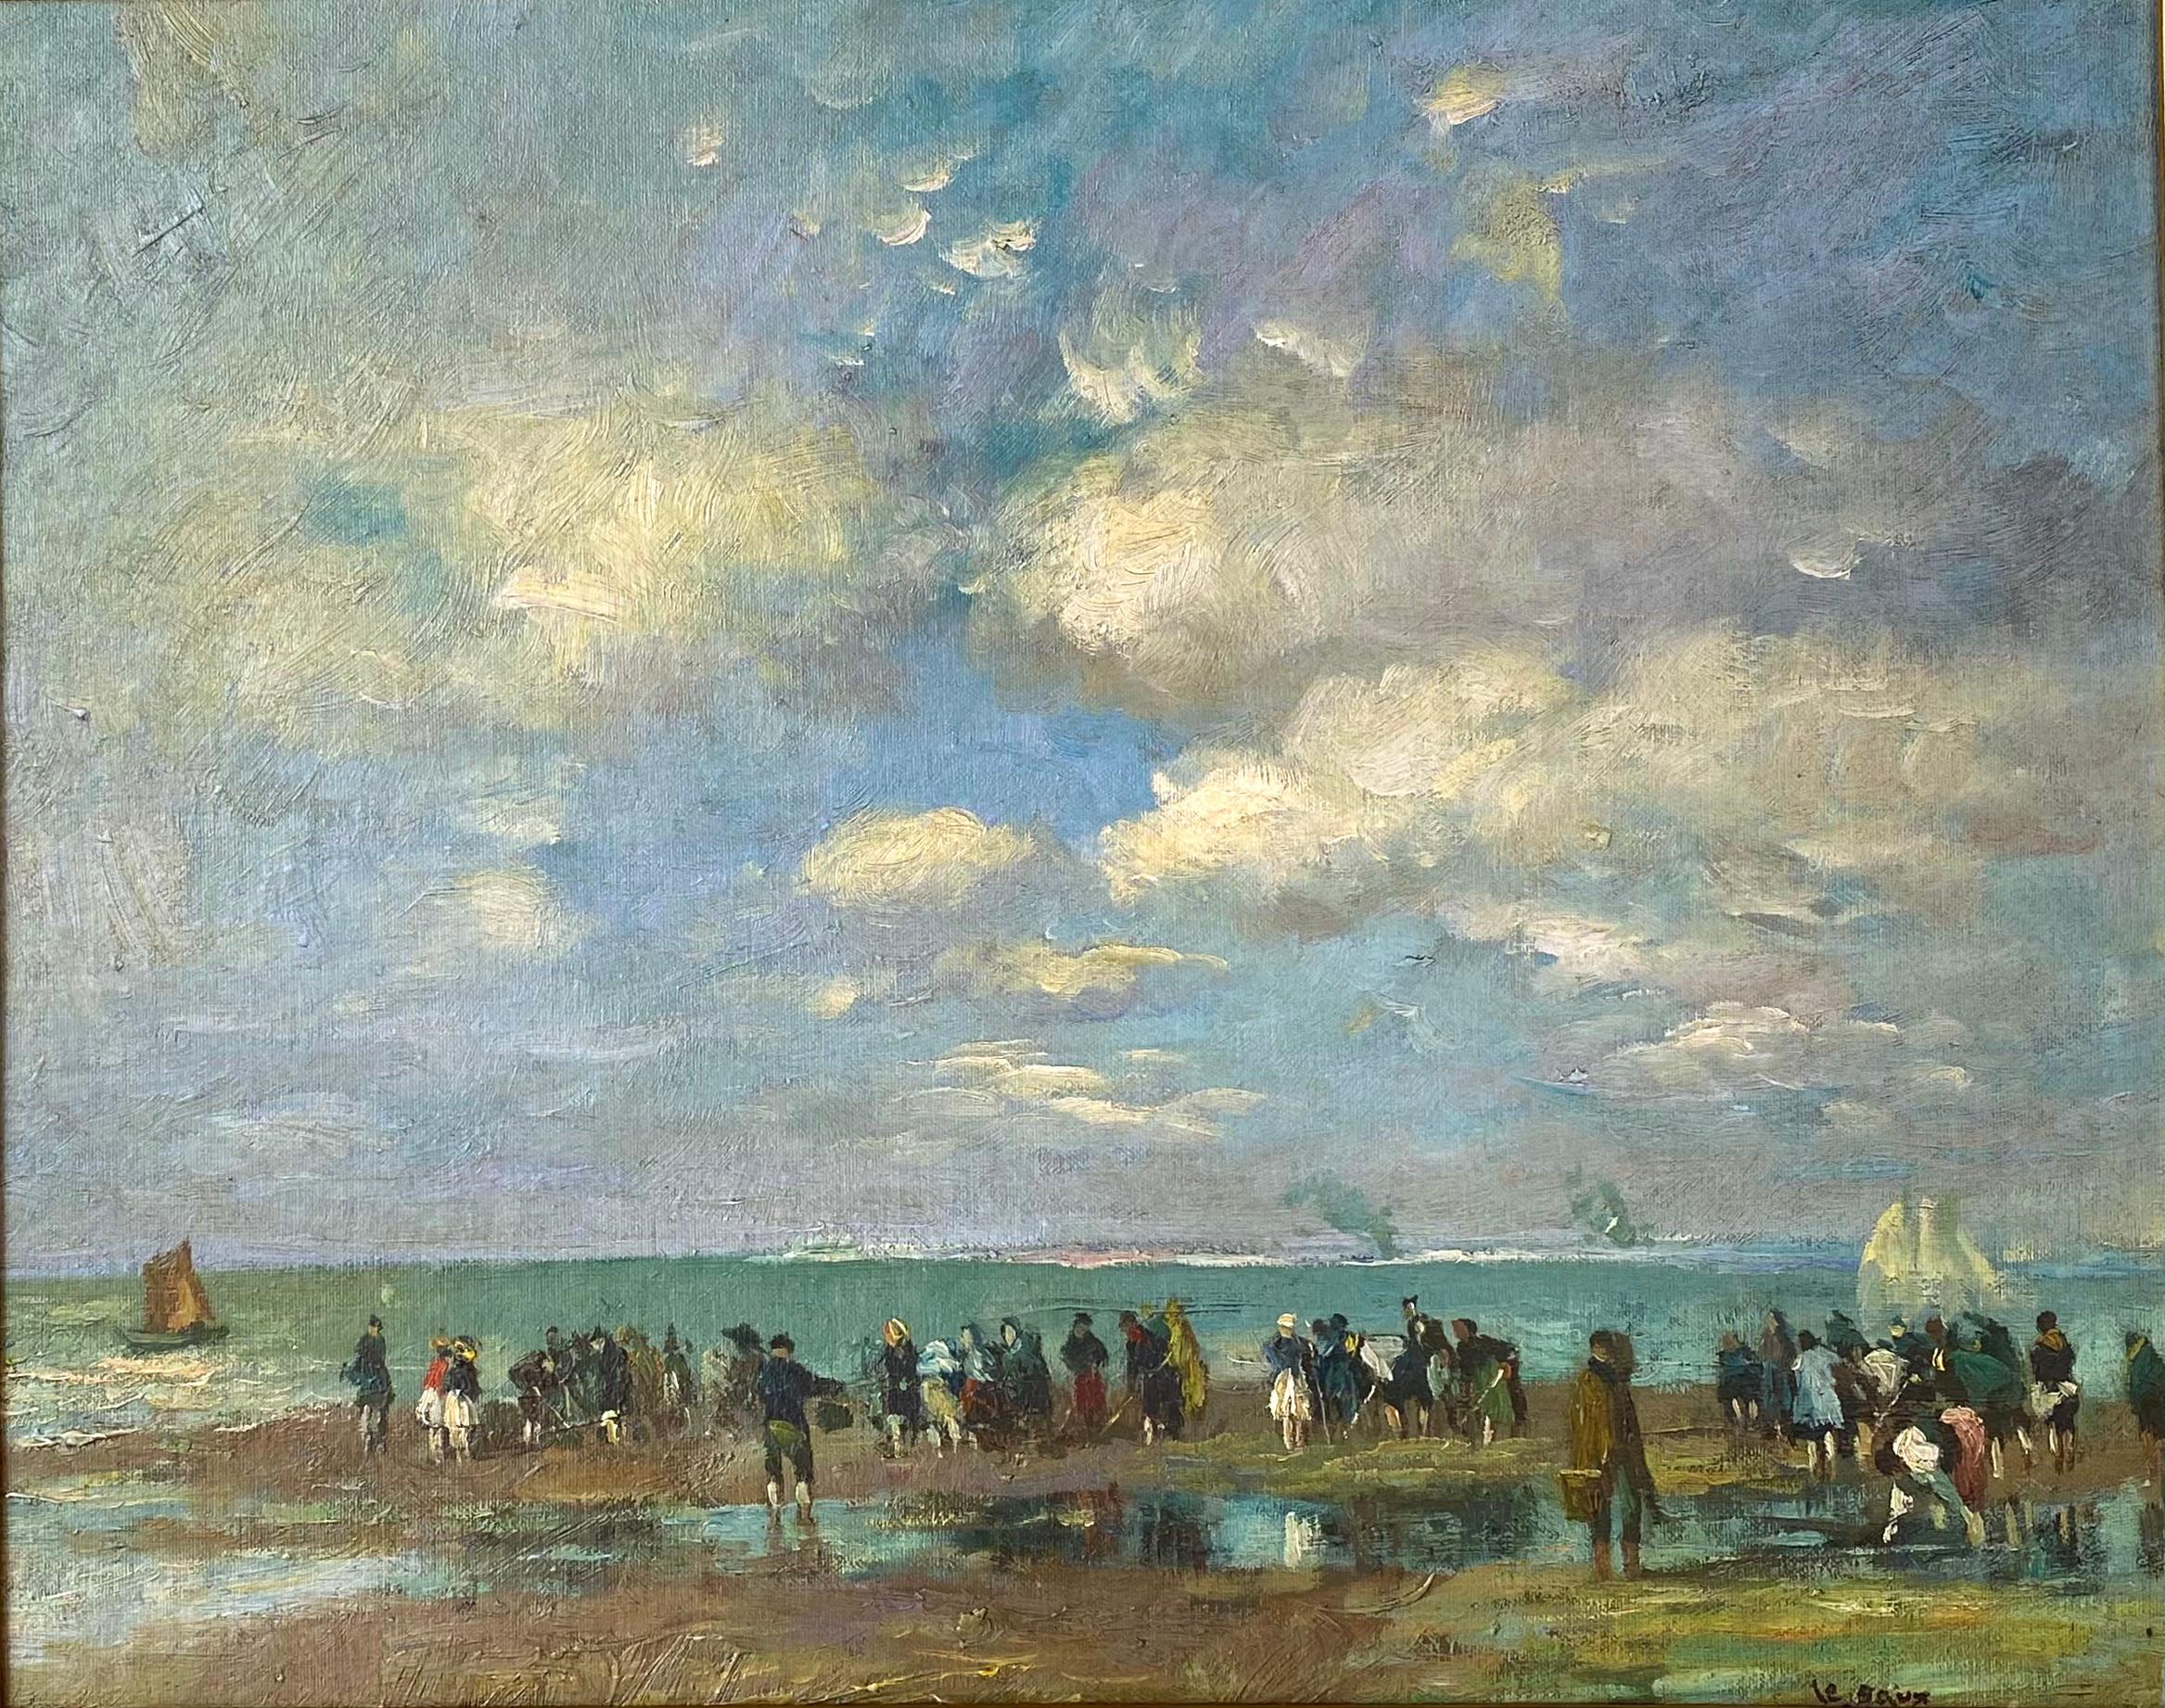 “Figures on the Beach” - Painting by J. Le Saux